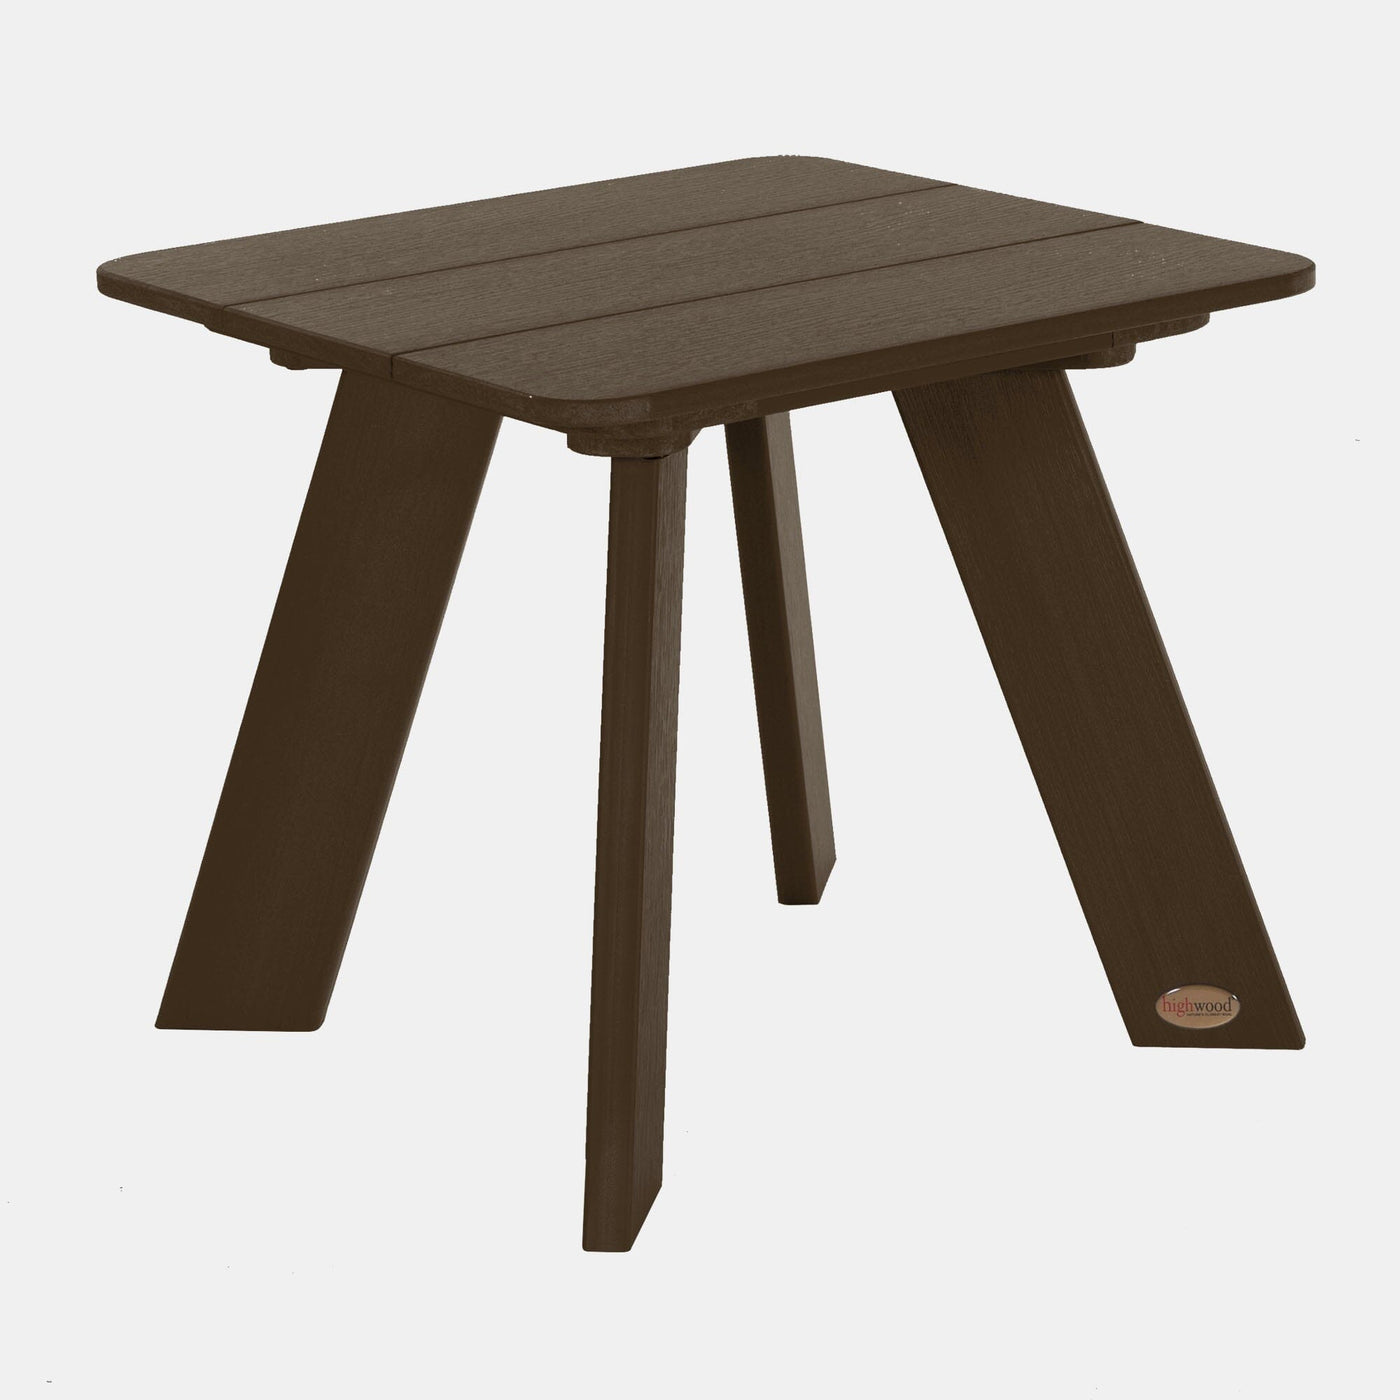 Italica Modern Side table in Weathered Acorn brown